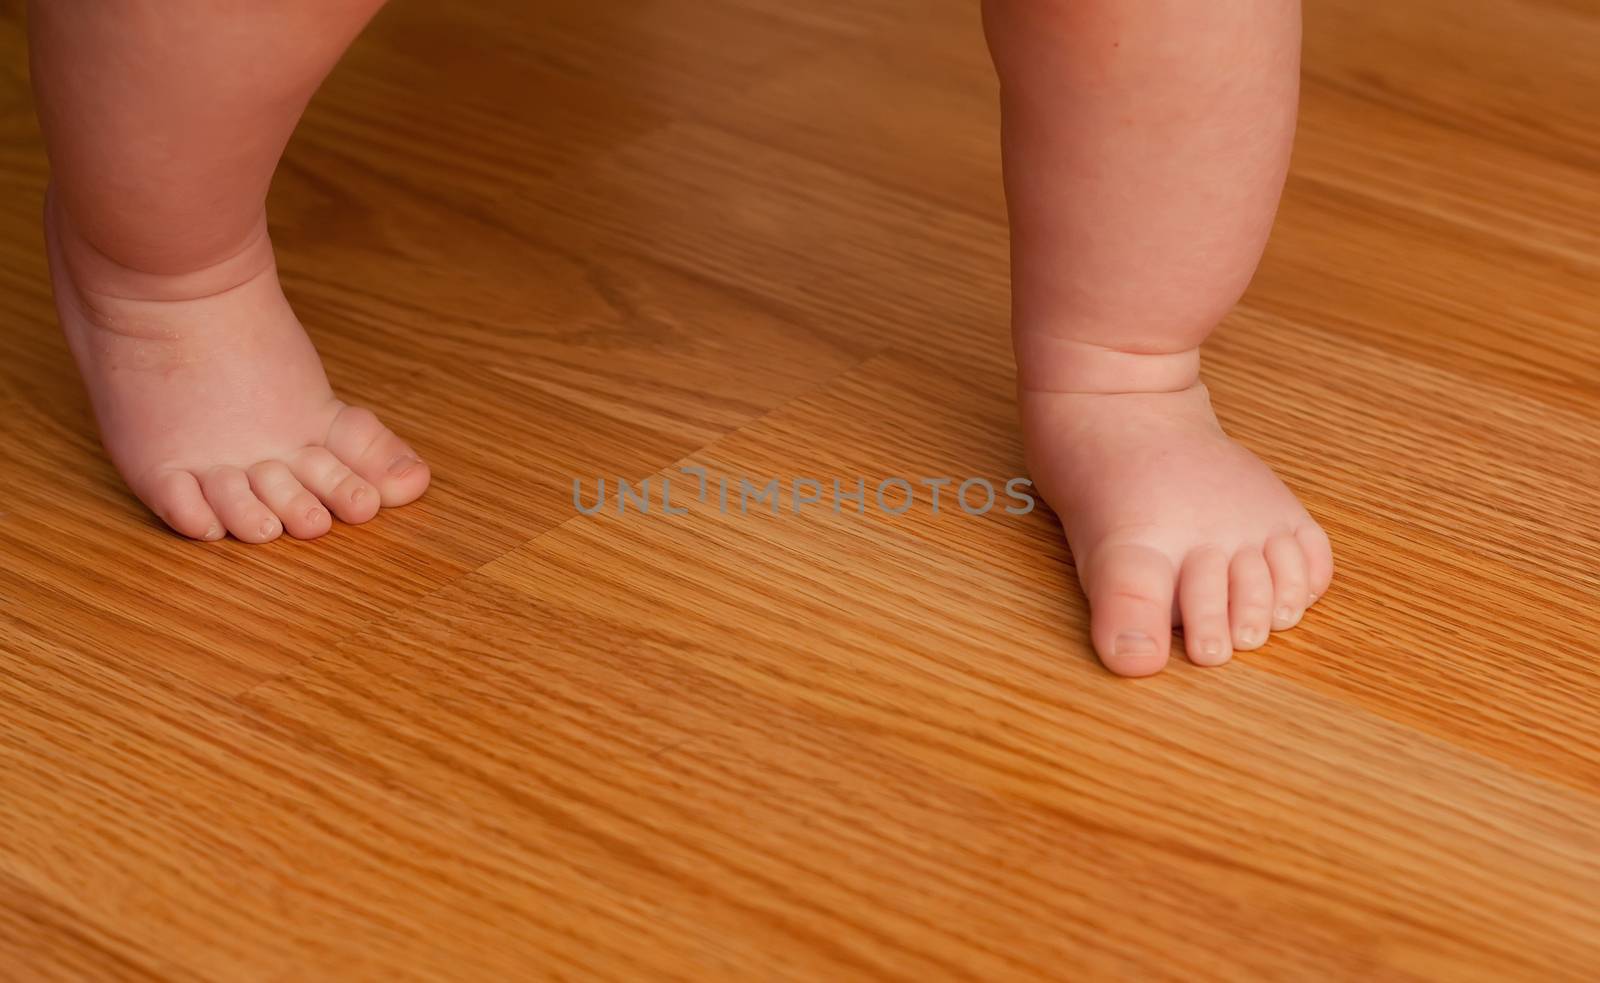 Young girl walking on a hard wood floor for her first time